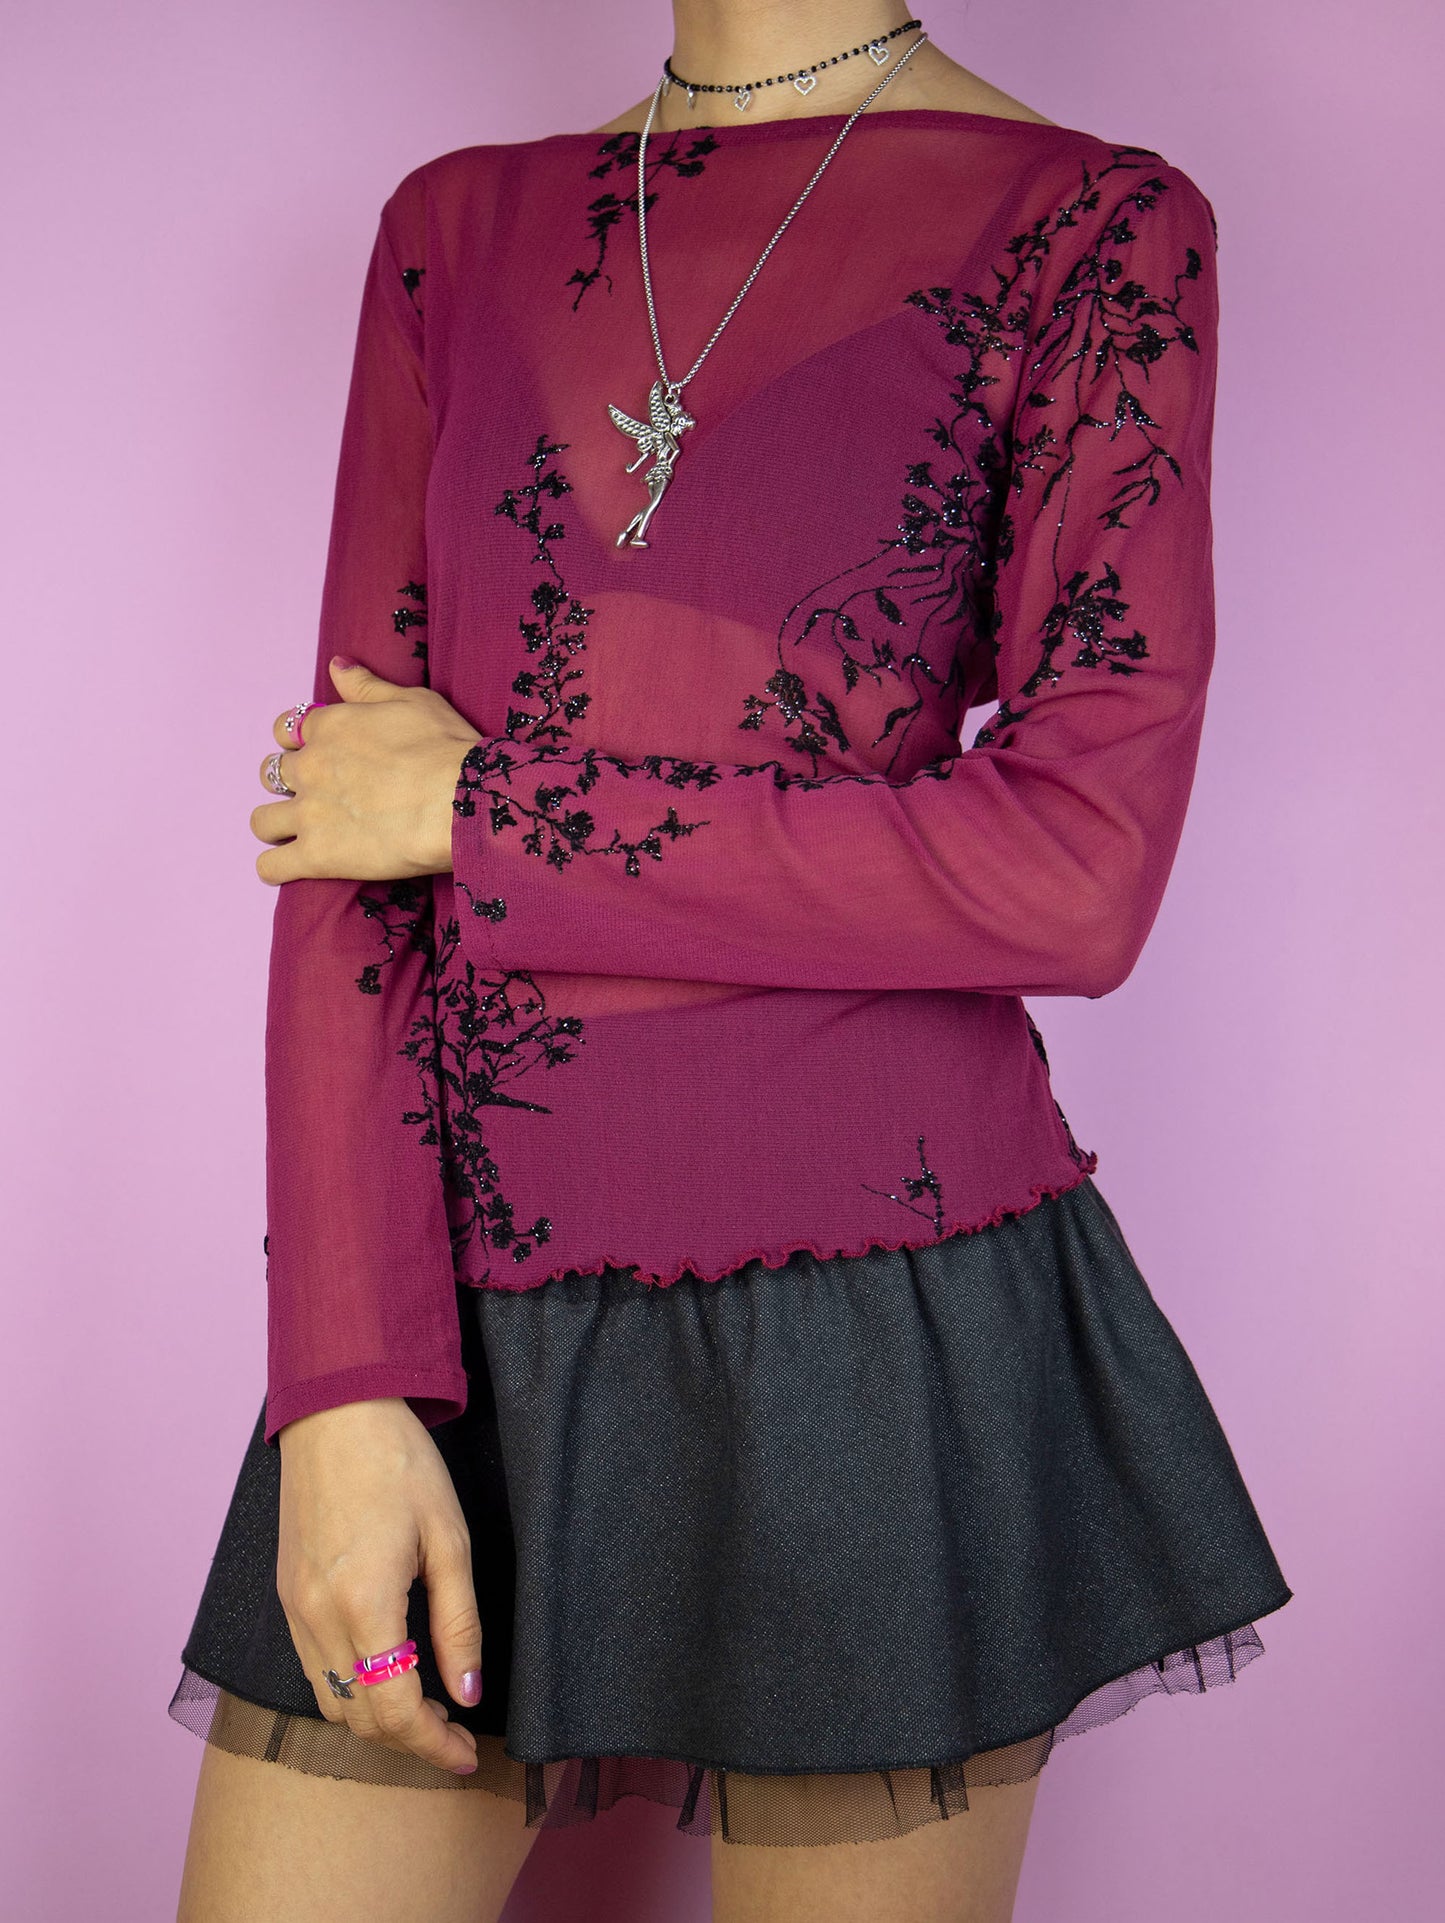 The Vintage 90s Maroon Mesh Top is a burgundy red long sleeve semi-sheer mesh top with black sparkly floral details, back button closure and lettuce hem. Lovely dark romantic fairy goth 1990s shirt.